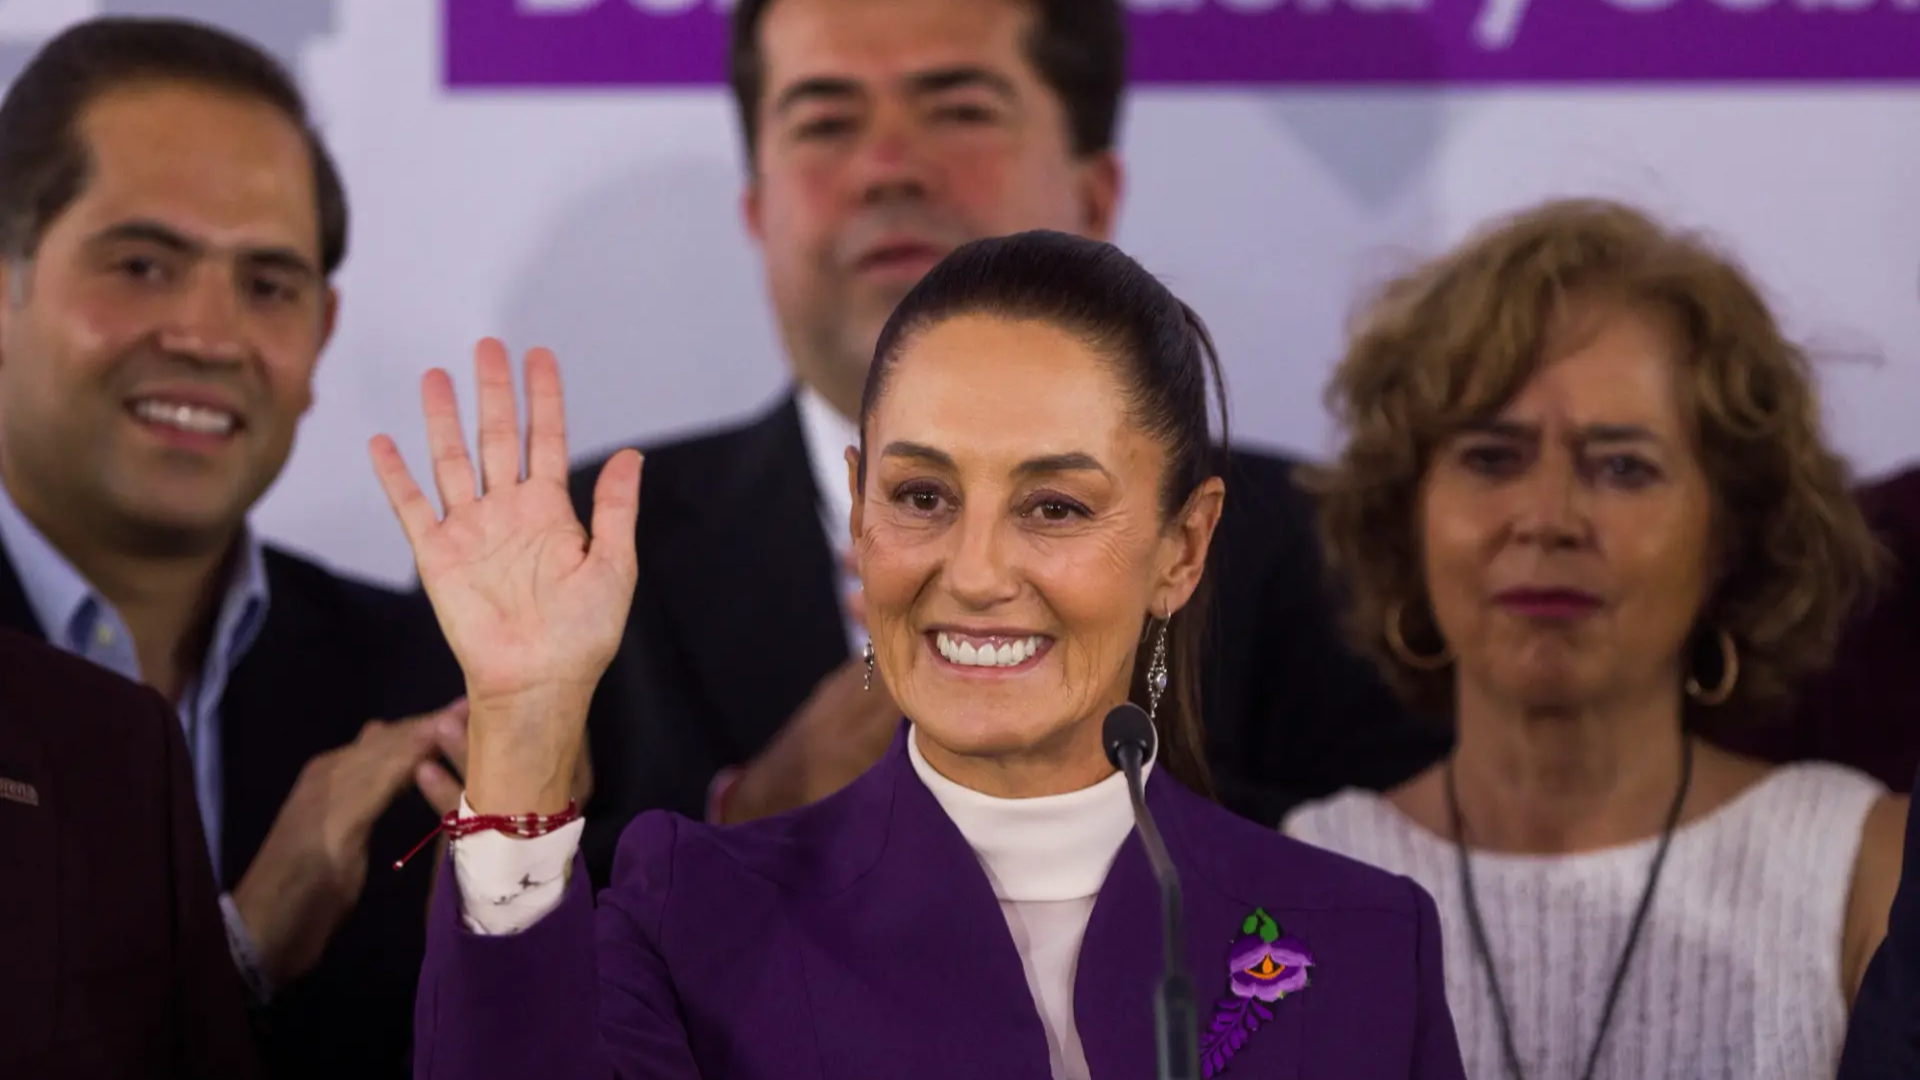 Is Mexico Ready To Elect Its First Female President Amid Security And Violence Concerns?